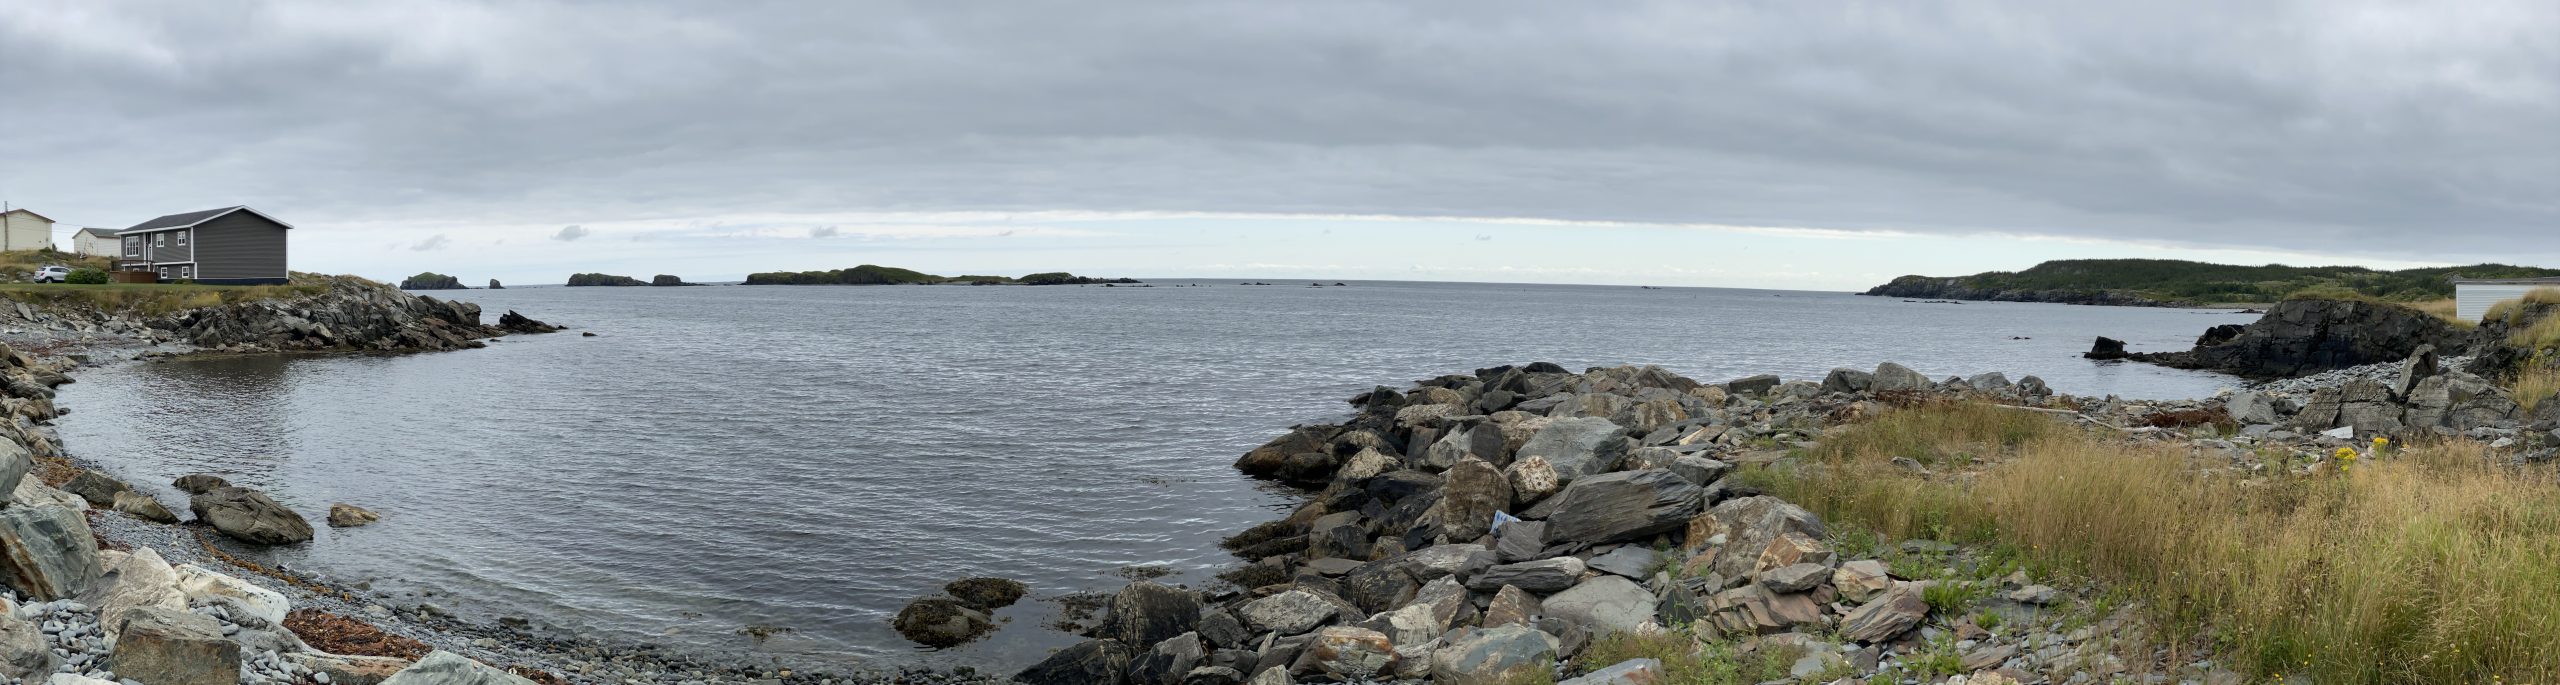 A panoramic view of the coastline at Melrose, on the Bonavista Peninsula in Newfoundland.